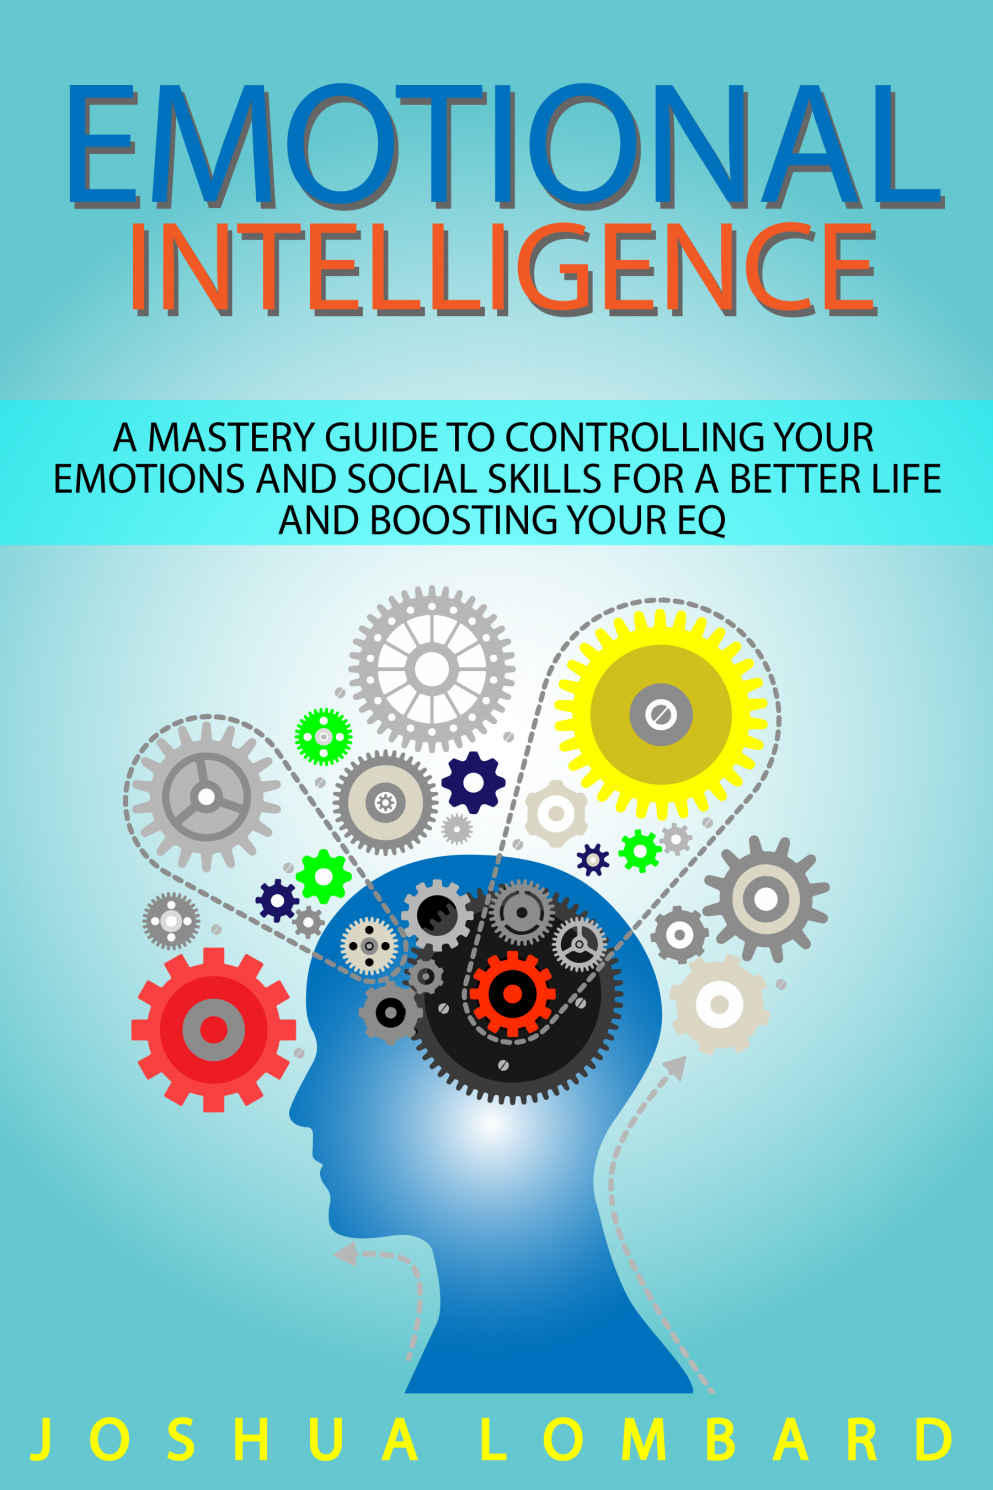 research article emotional intelligence